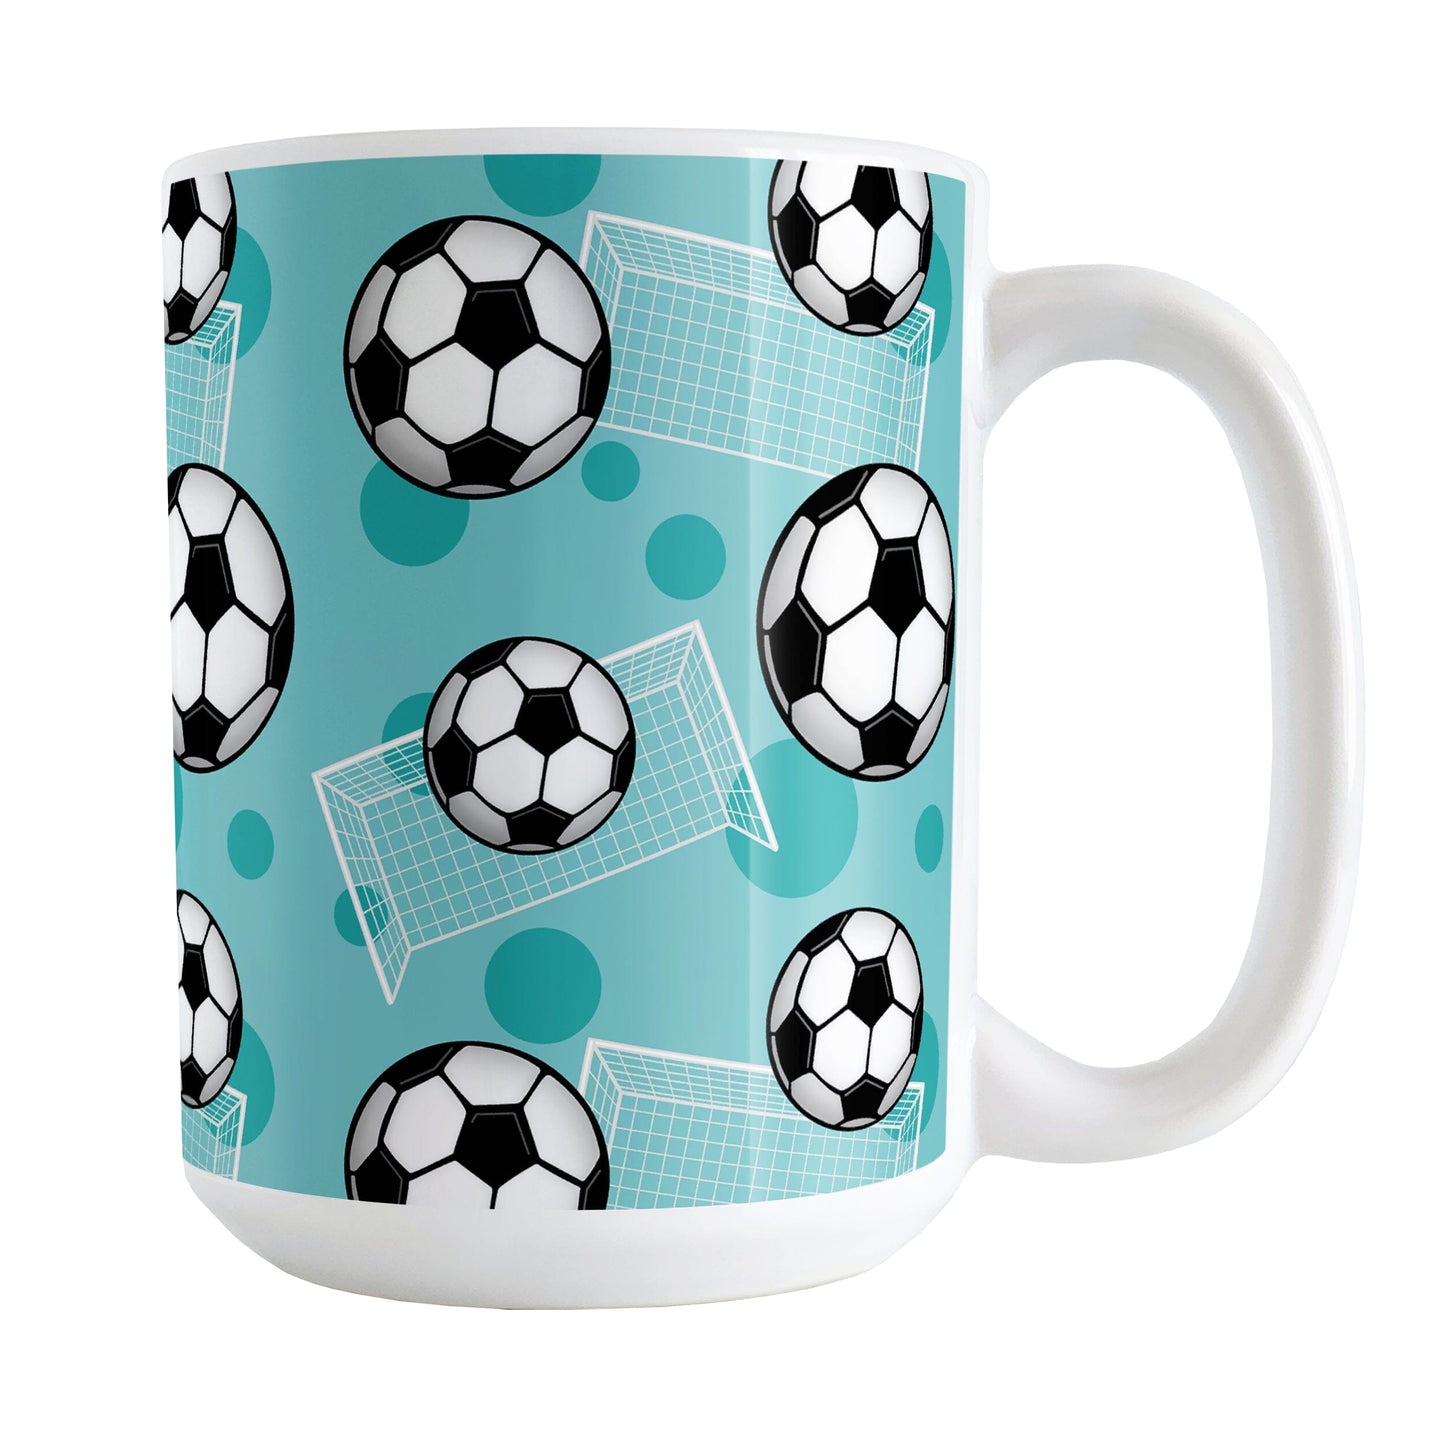 Soccer Ball and Goal Pattern Teal Mug (15oz) at Amy's Coffee Mugs. A ceramic coffee mug designed with a pattern of soccer balls and white soccer goals over a teal background with darker teal circles.